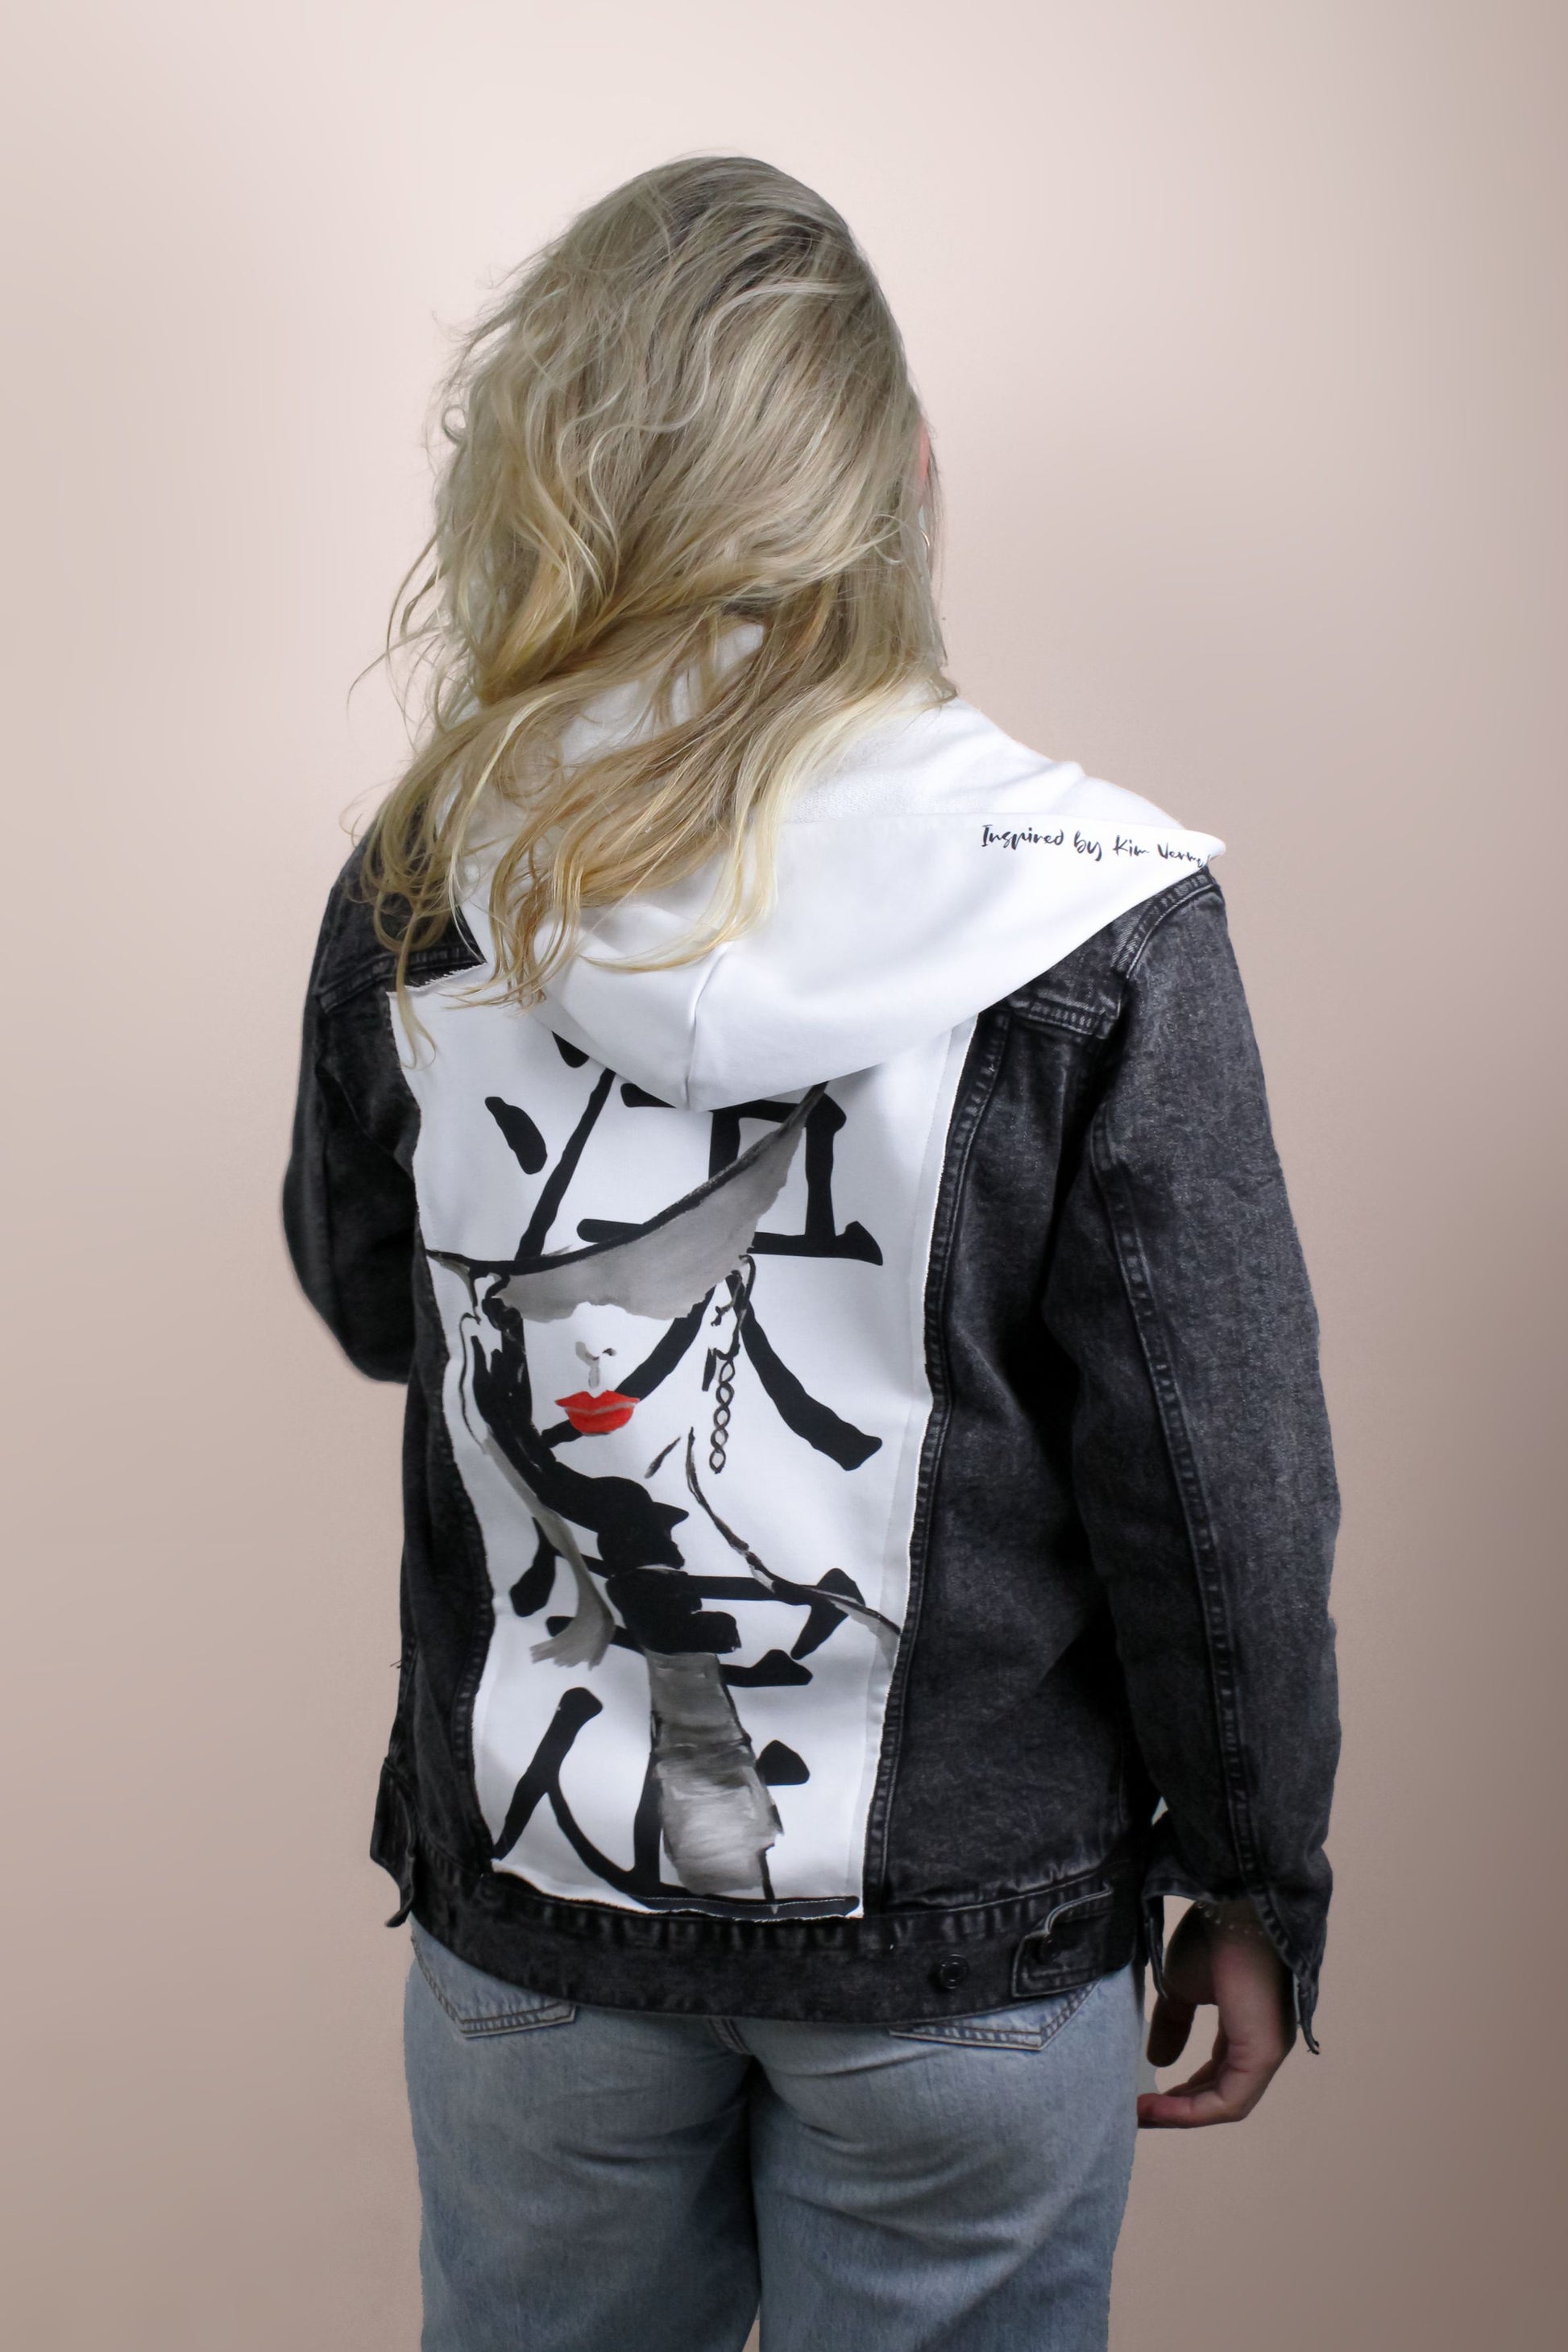 Printed black and white jean jacket by aphellos